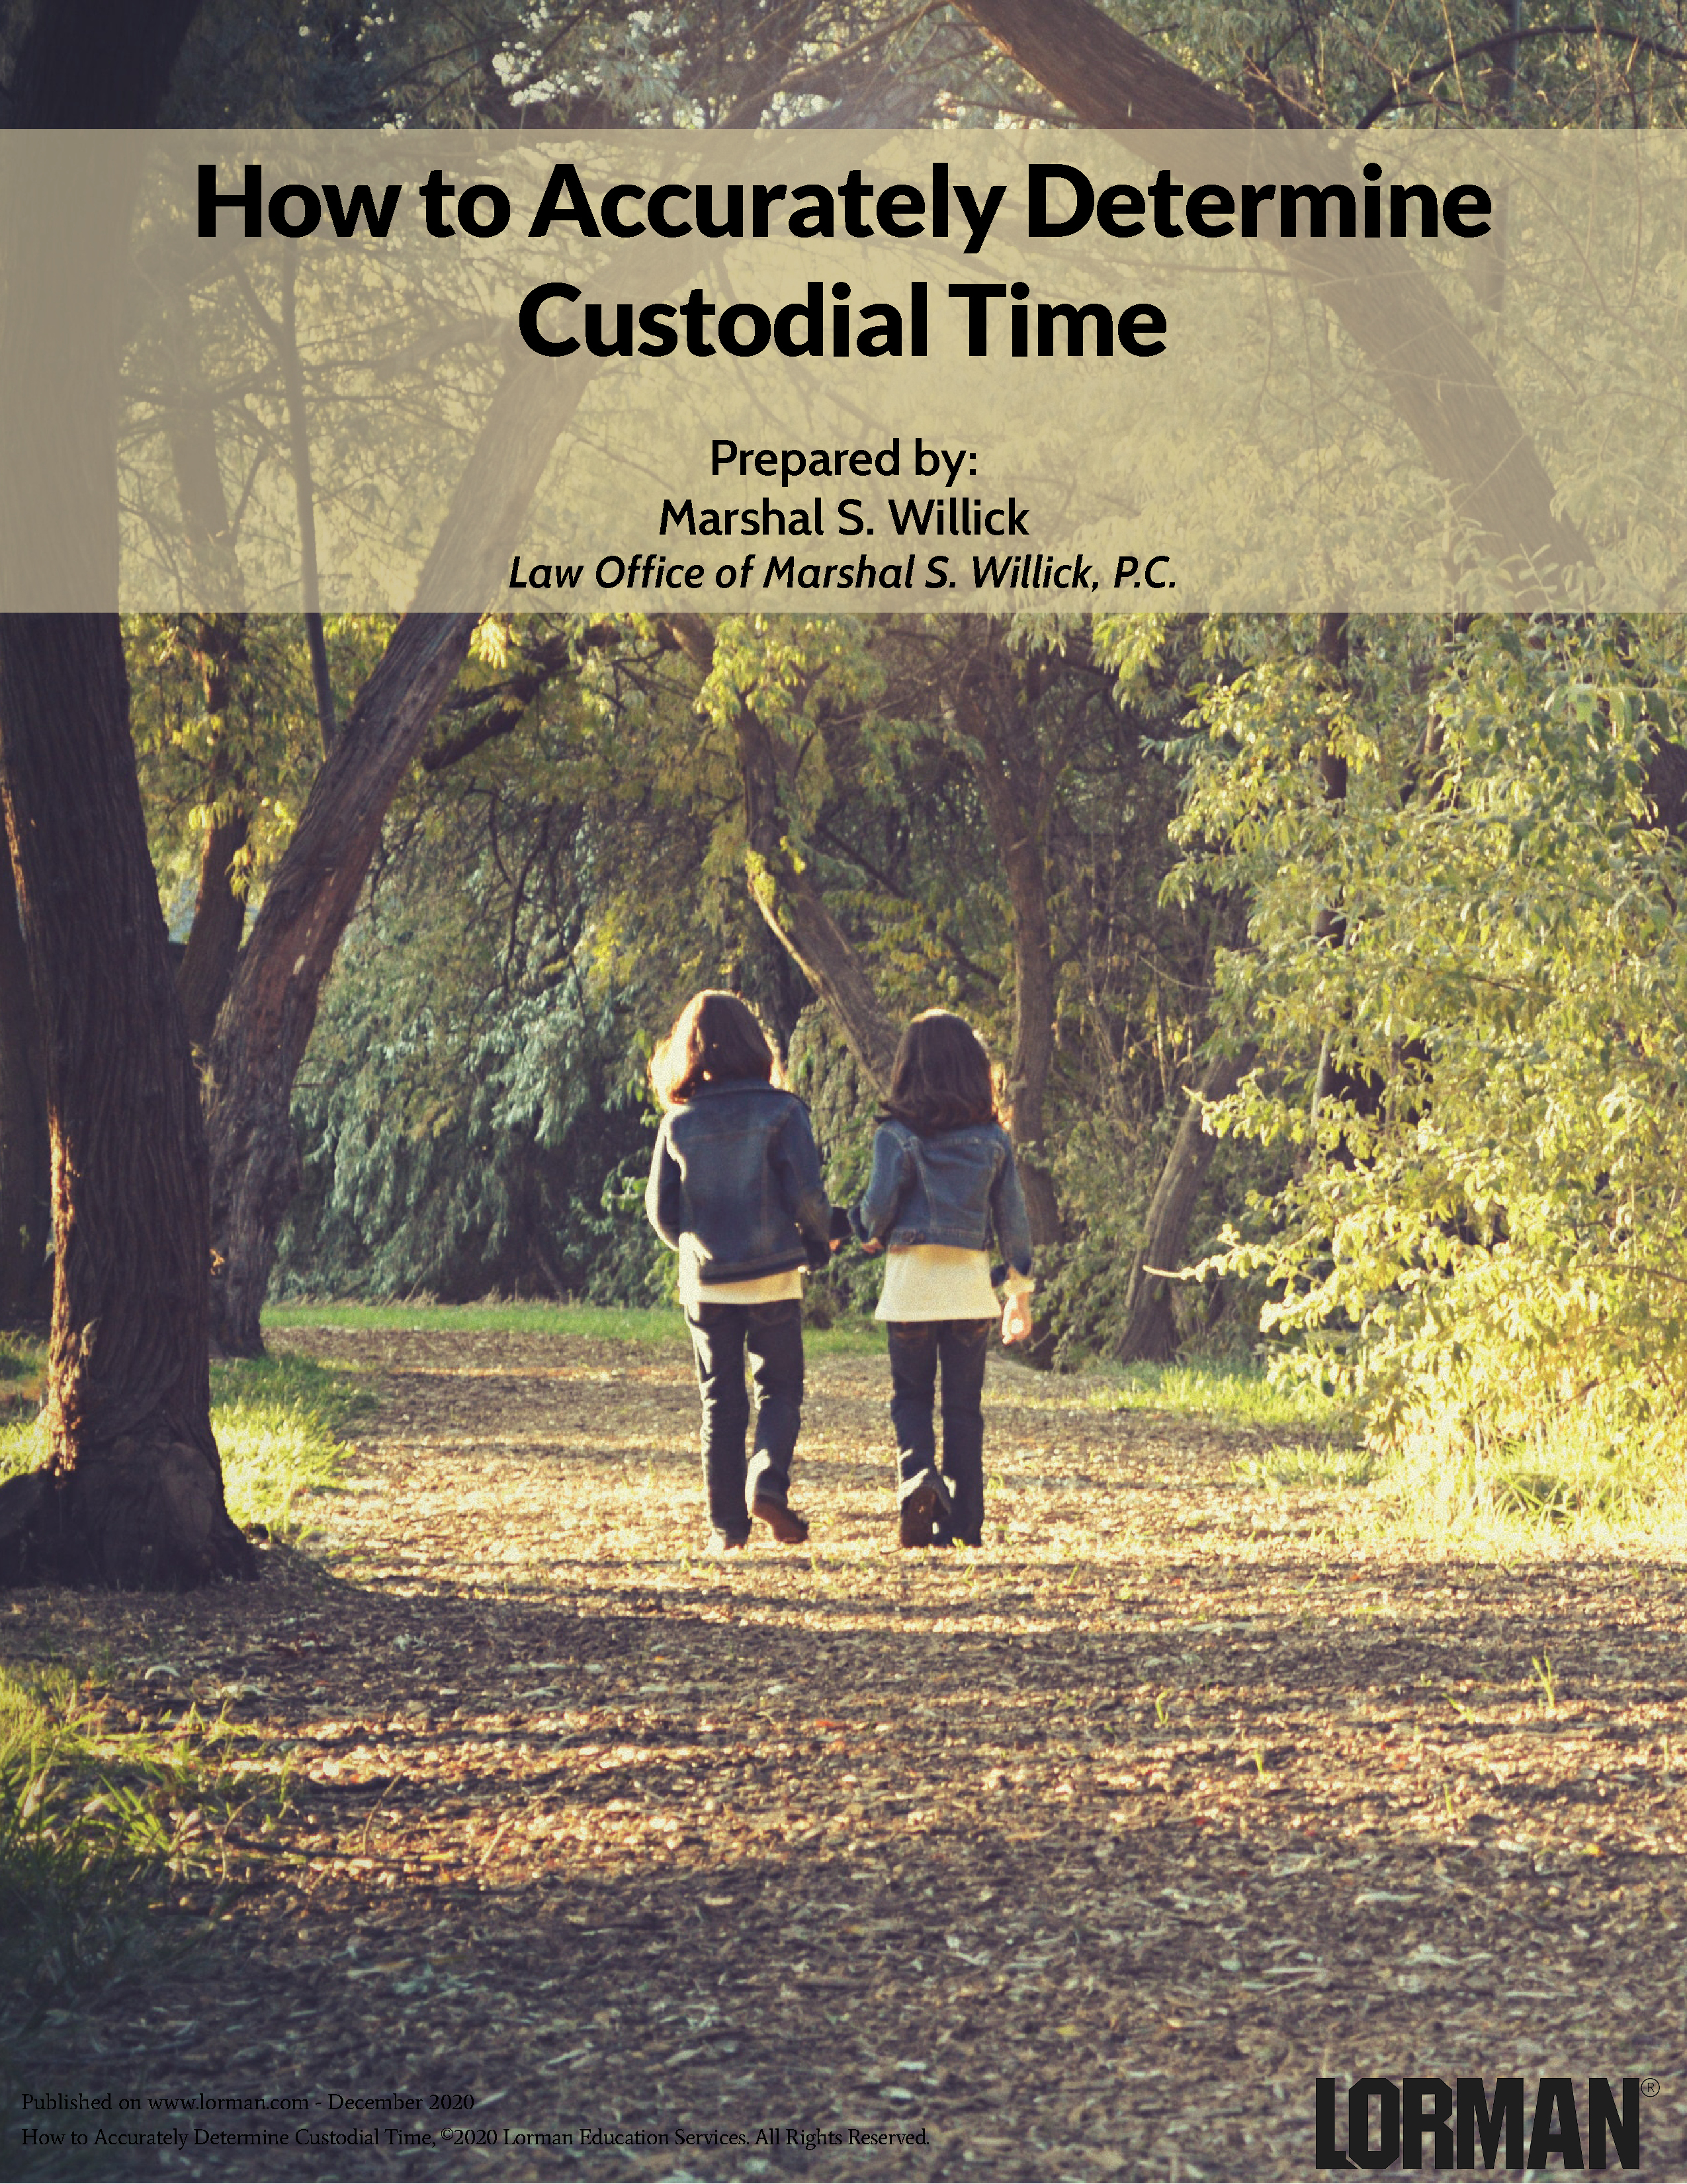 How to Accurately Determine Custodial Time